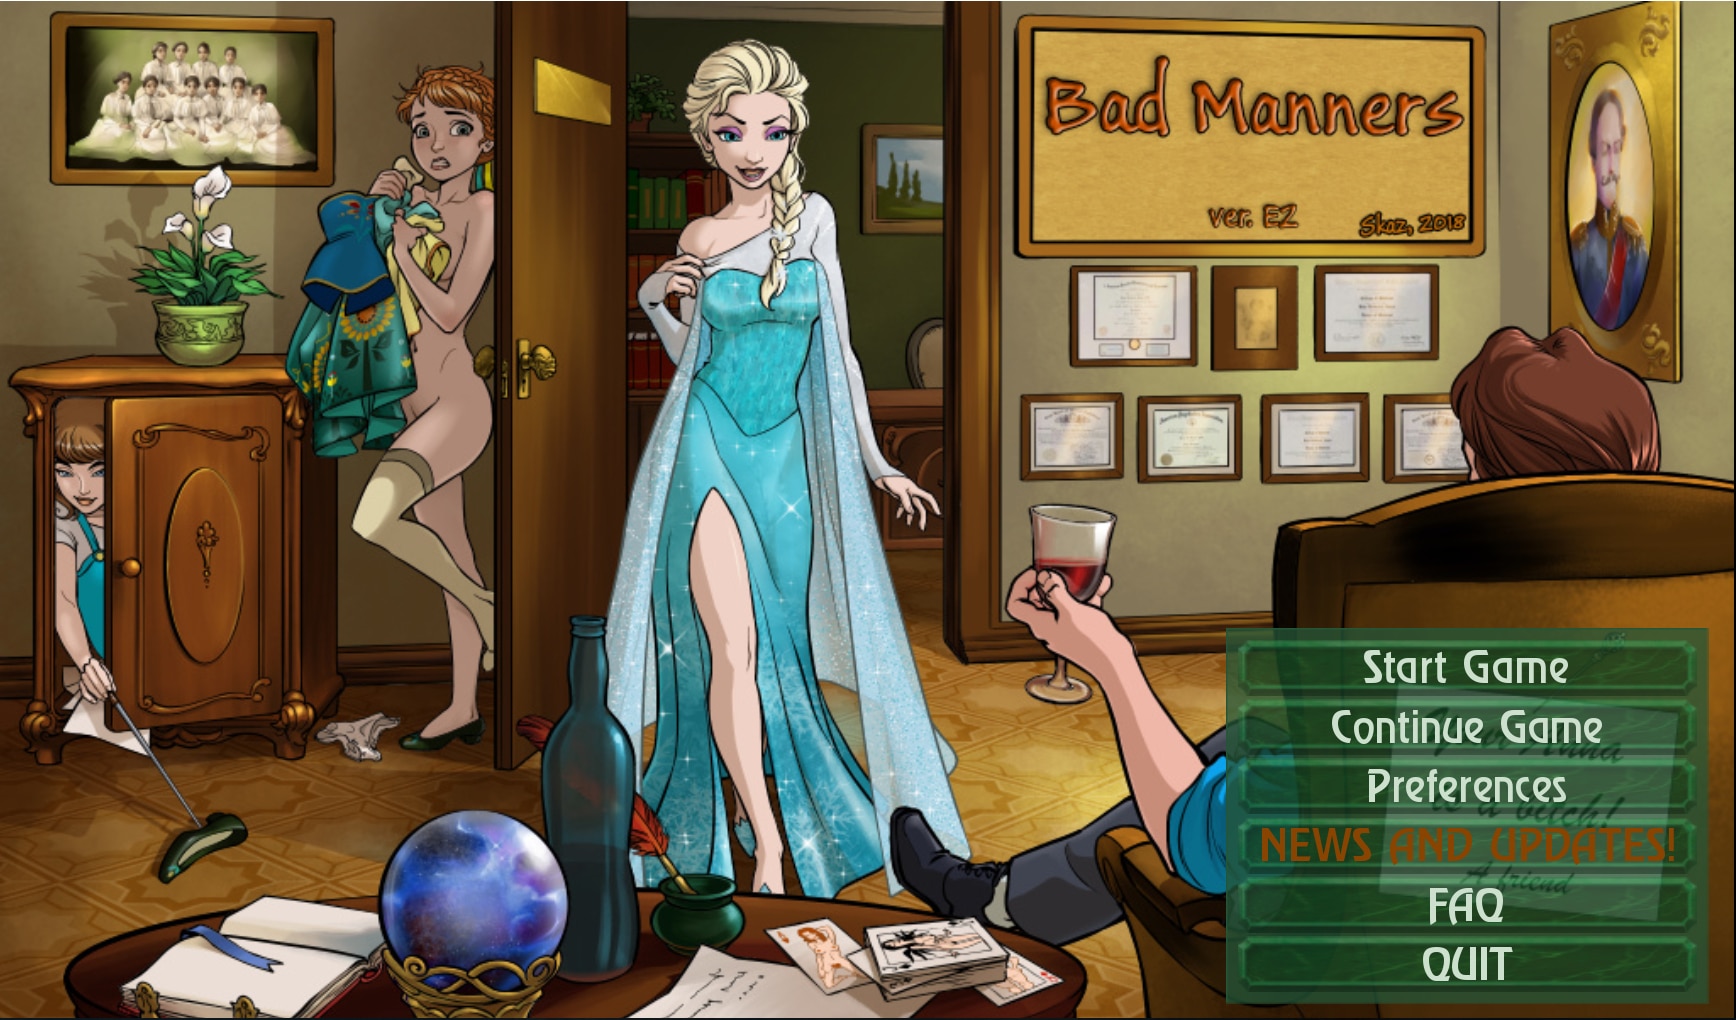 Bad manners porn game